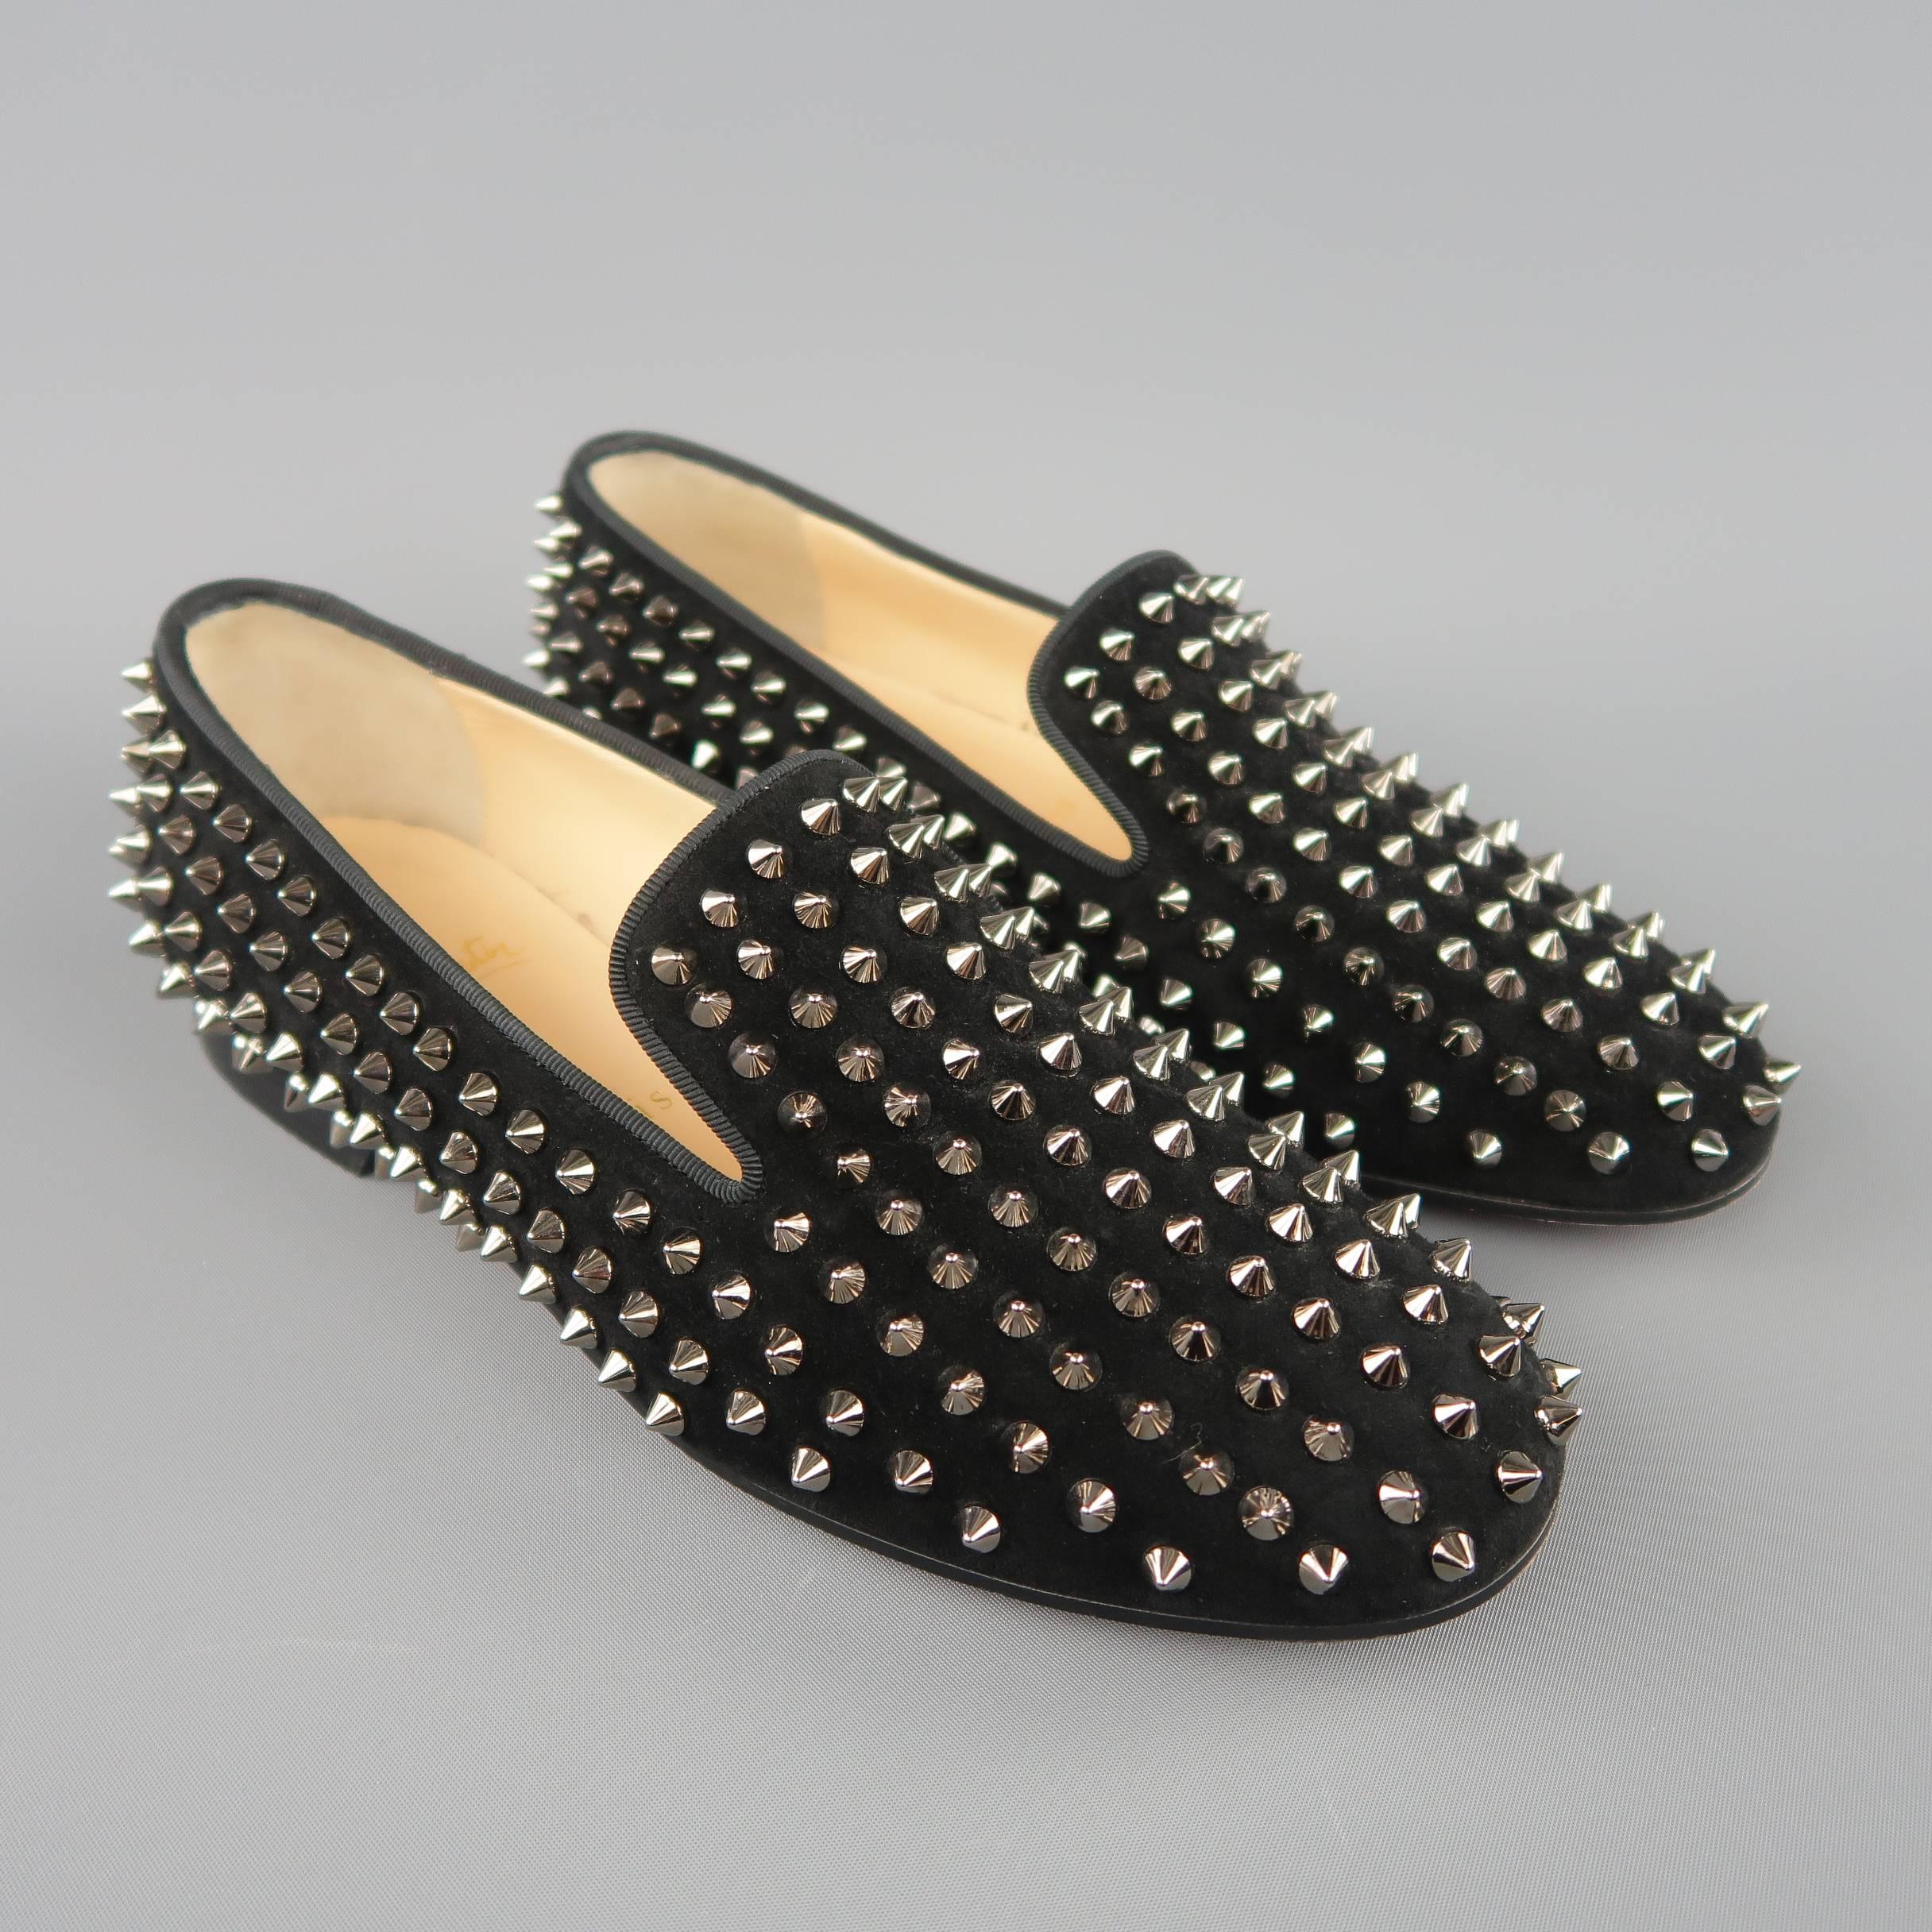 CHRISTIAN LOUBOUTIN loafers come in black suede with faille piping, red sole, and silver tone spikes throughout. Worn once. With dust bags and box. Made in Italy.
 
Excellent Pre-Owned Condition.
Marked: IT 38
 
Outsole: 9.75 x 3.5 in.
